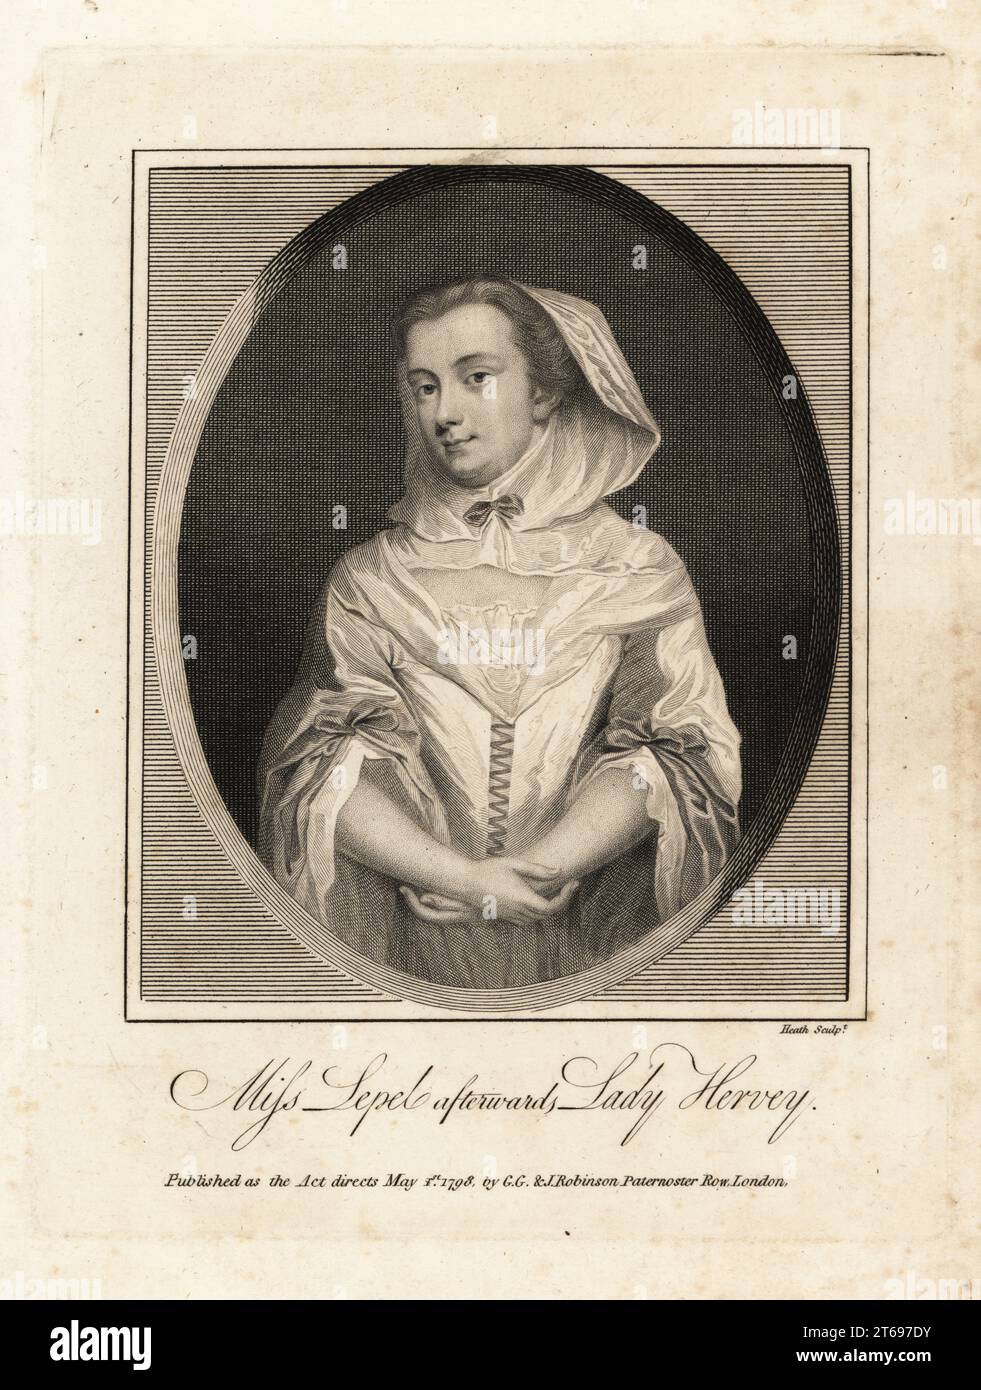 Mary Lepell (1700-1768), courtier to King George I, a famous beauty and conversationalist. Married John Hervey, 2nd Baron Hervey of Ickworth in 1720. Miss Lepel afterwards Lady Hervey. Copperplate engraving by James Heath after a painting by published by G.G. and J. Robinson, Paternoster Row, London, 1798. Stock Photo